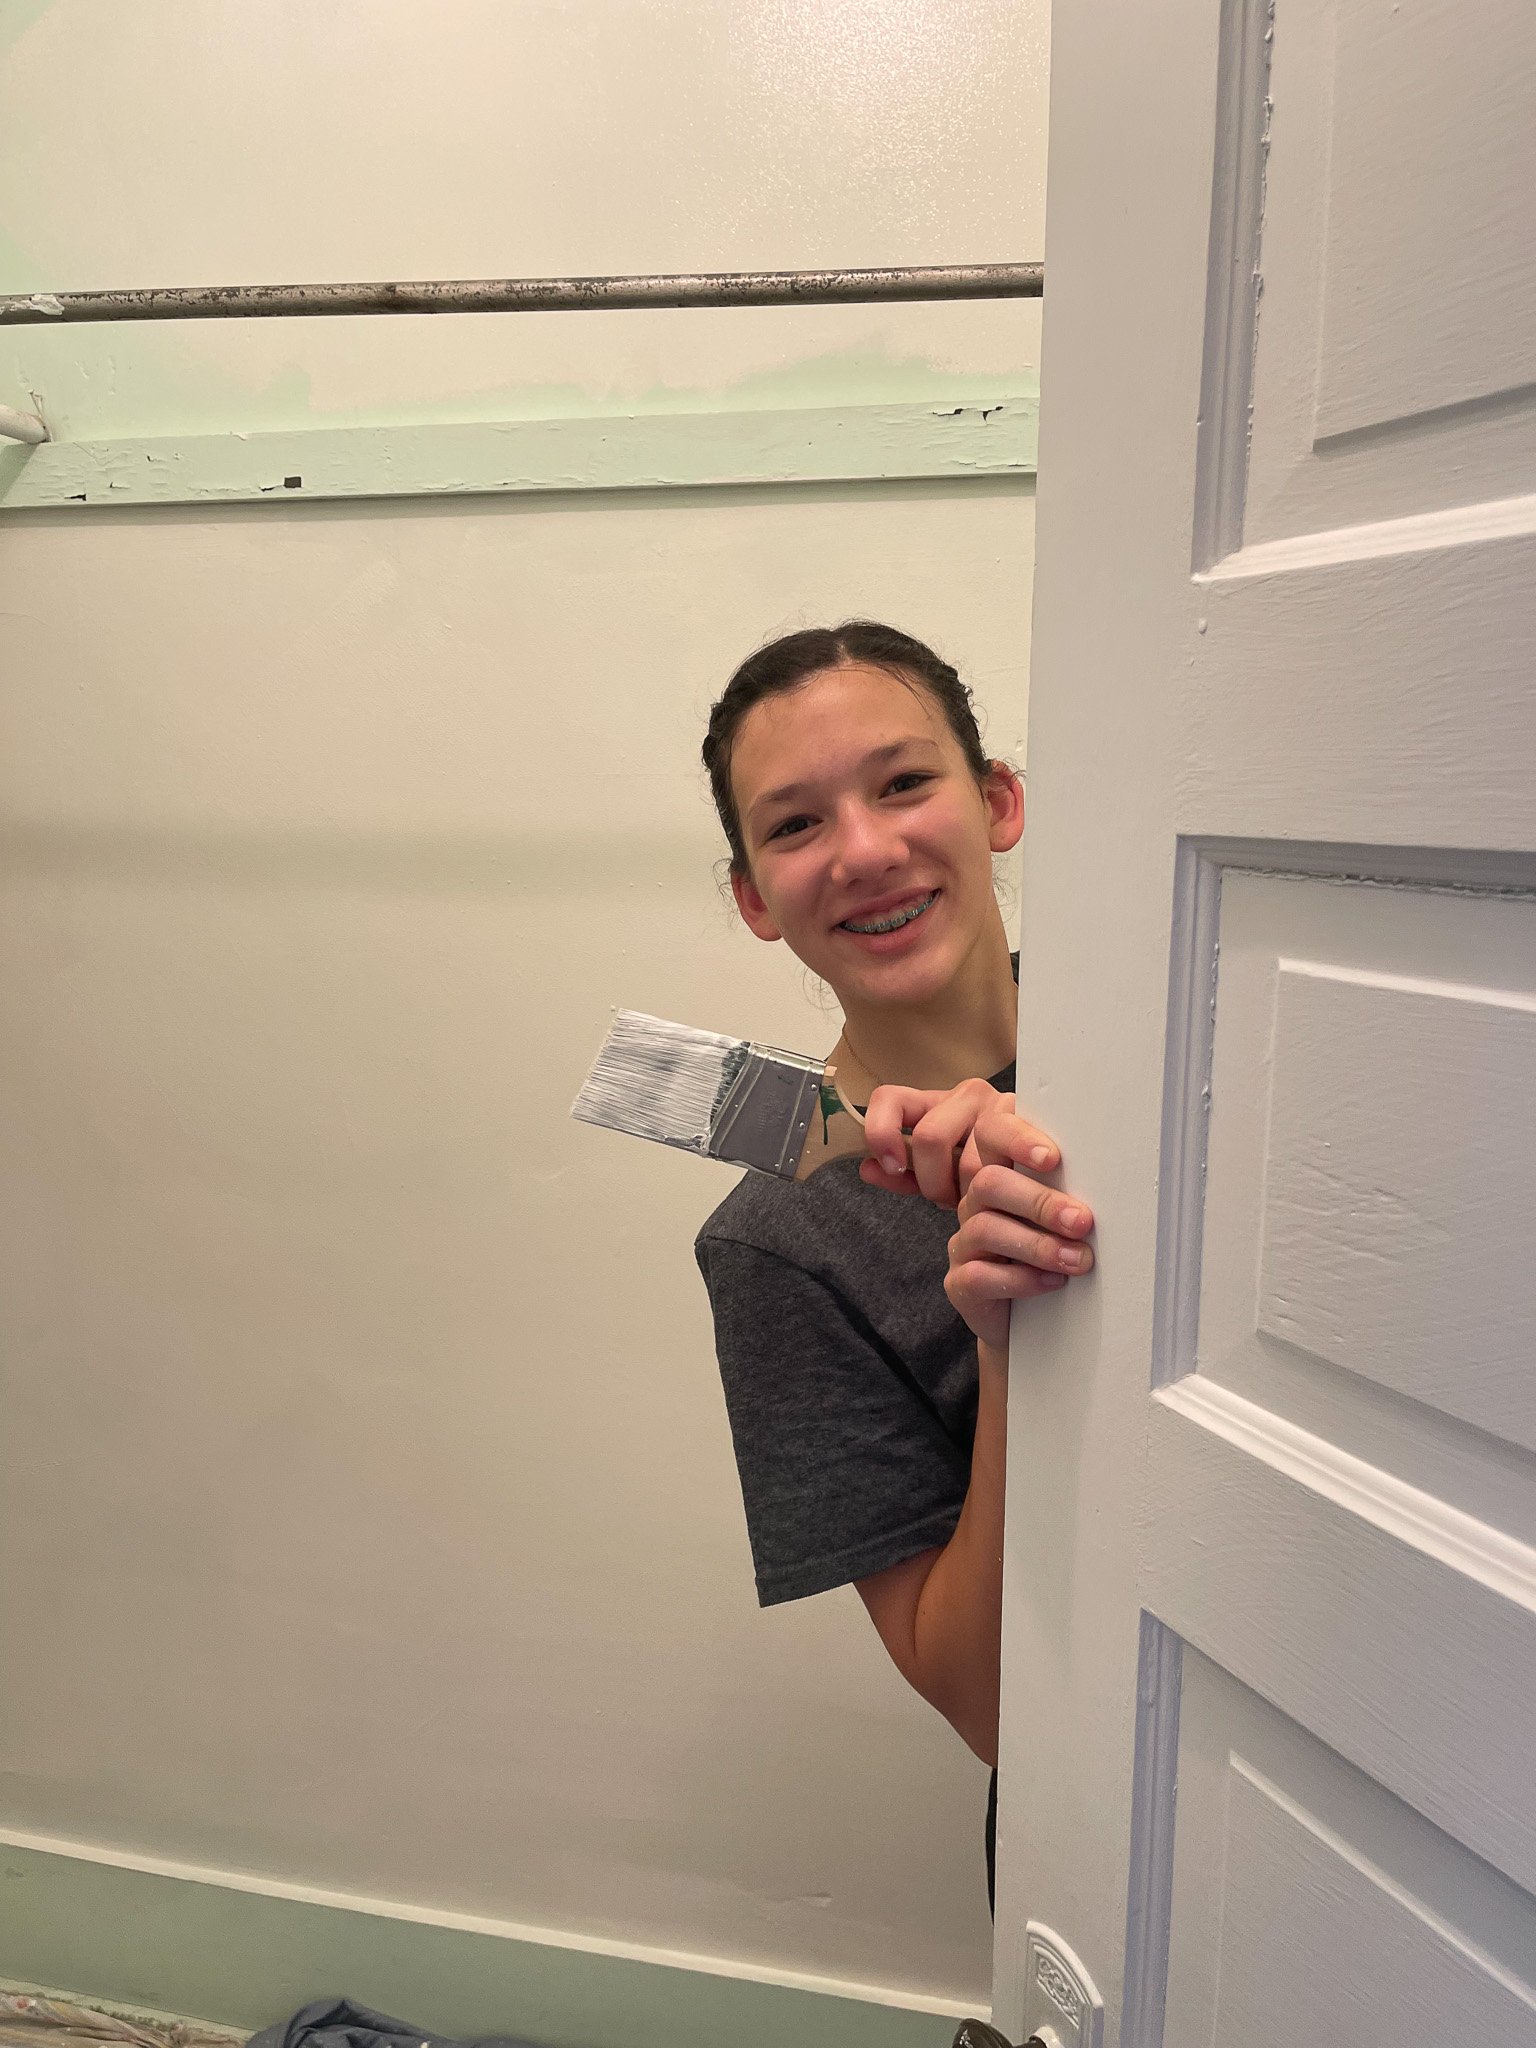 We'll pop in on our cute little painter, painting her closet.